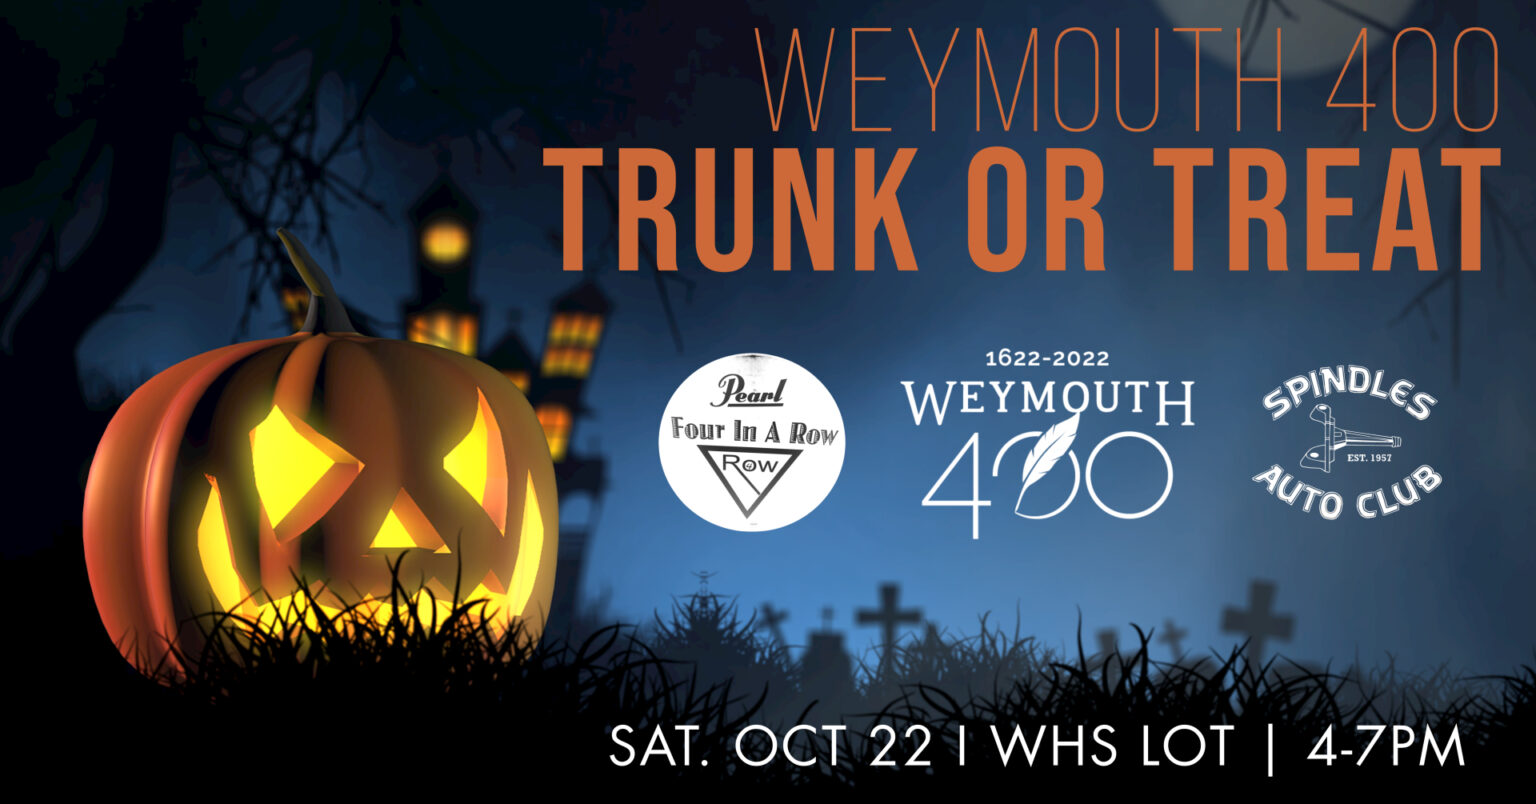 Weymouth 400 Trunk or Treat & Food Truck Fest 2022 365 things to do